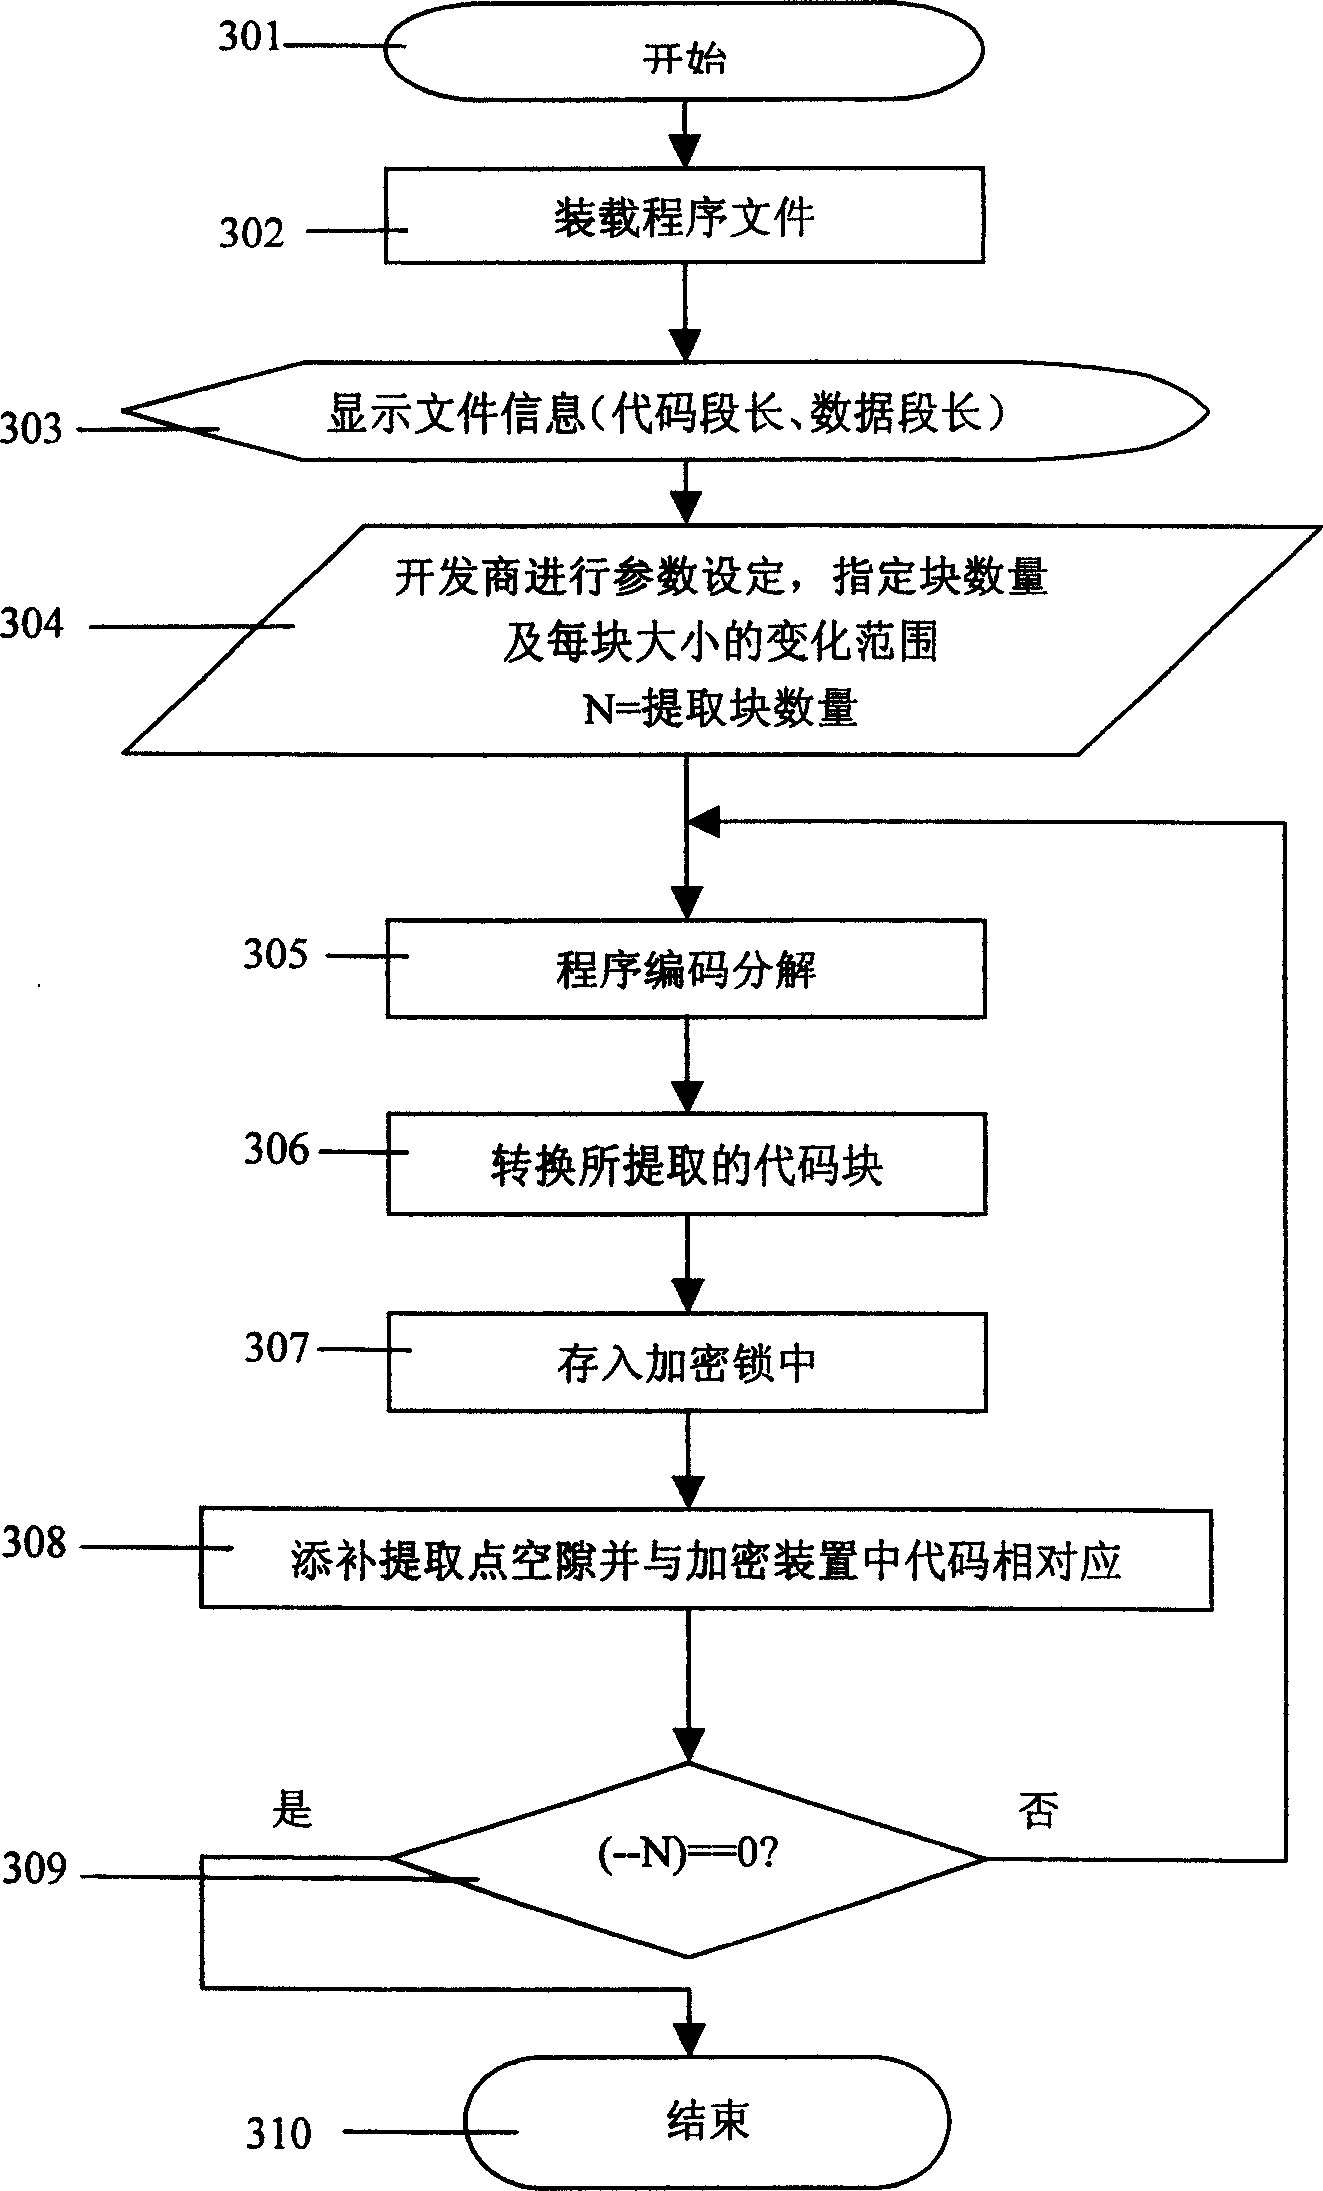 Software copy right protecting method for extracting partial code to enciphed device from software